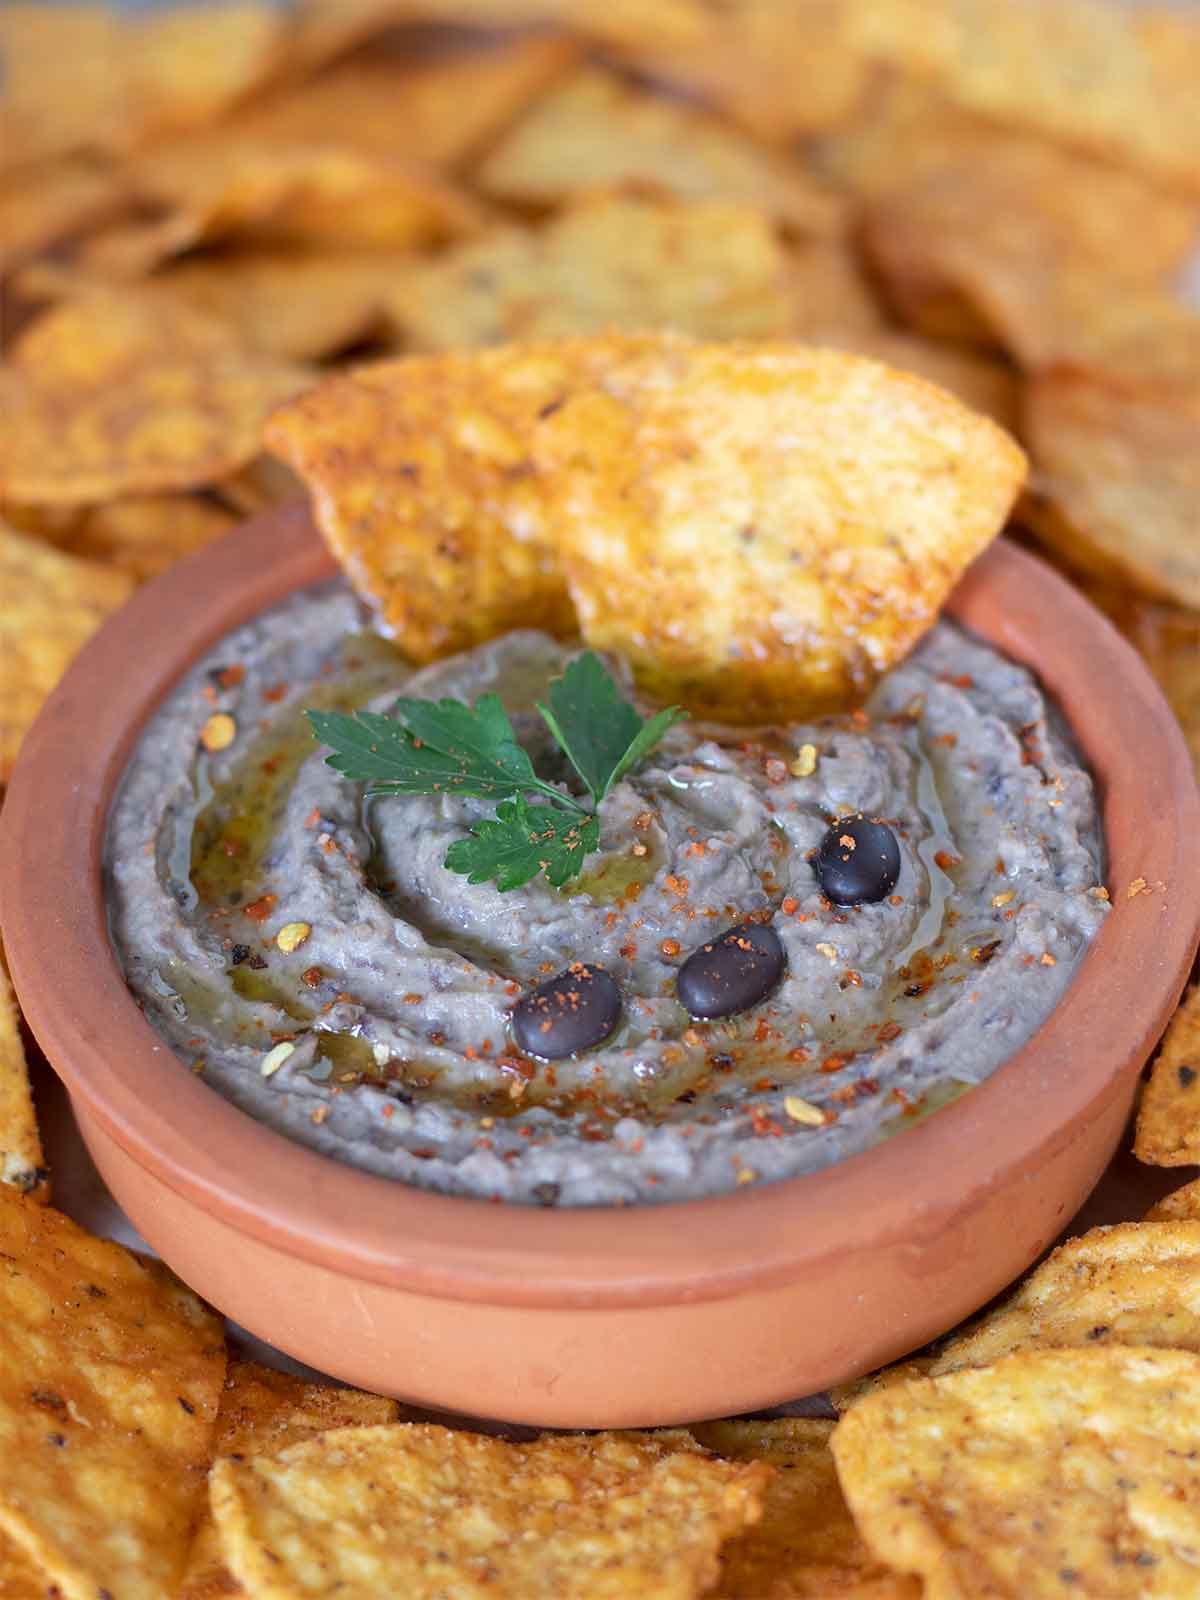 Spicy Mediterranean spread amde from balck beans in a bowl with red paper flakes parsley leaves, and corn chips